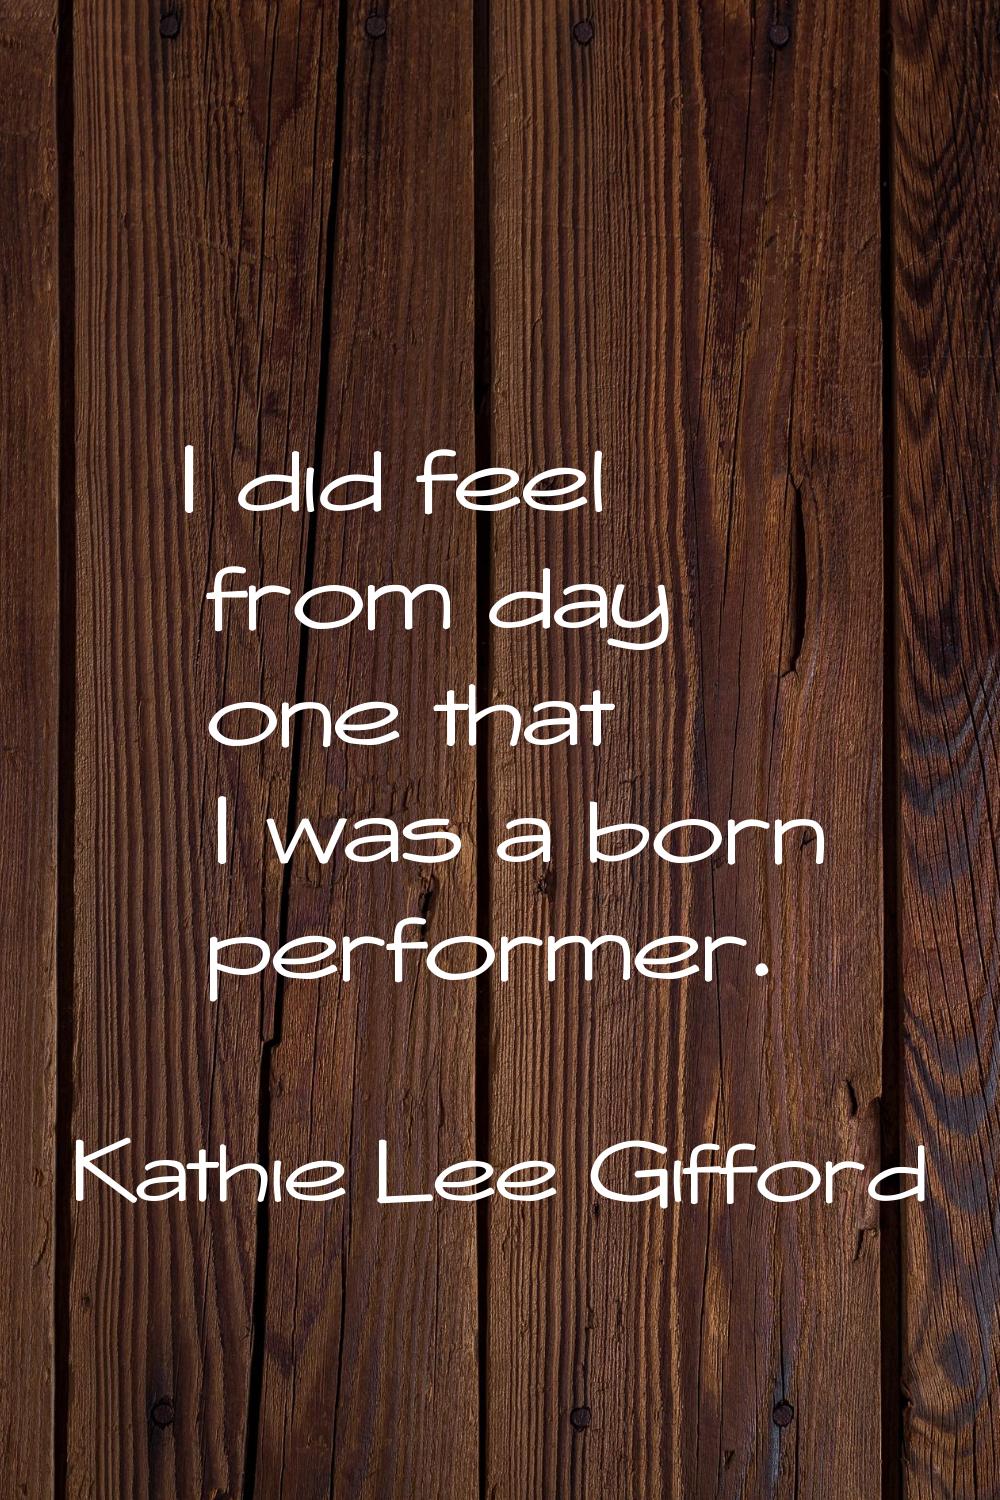 I did feel from day one that I was a born performer.